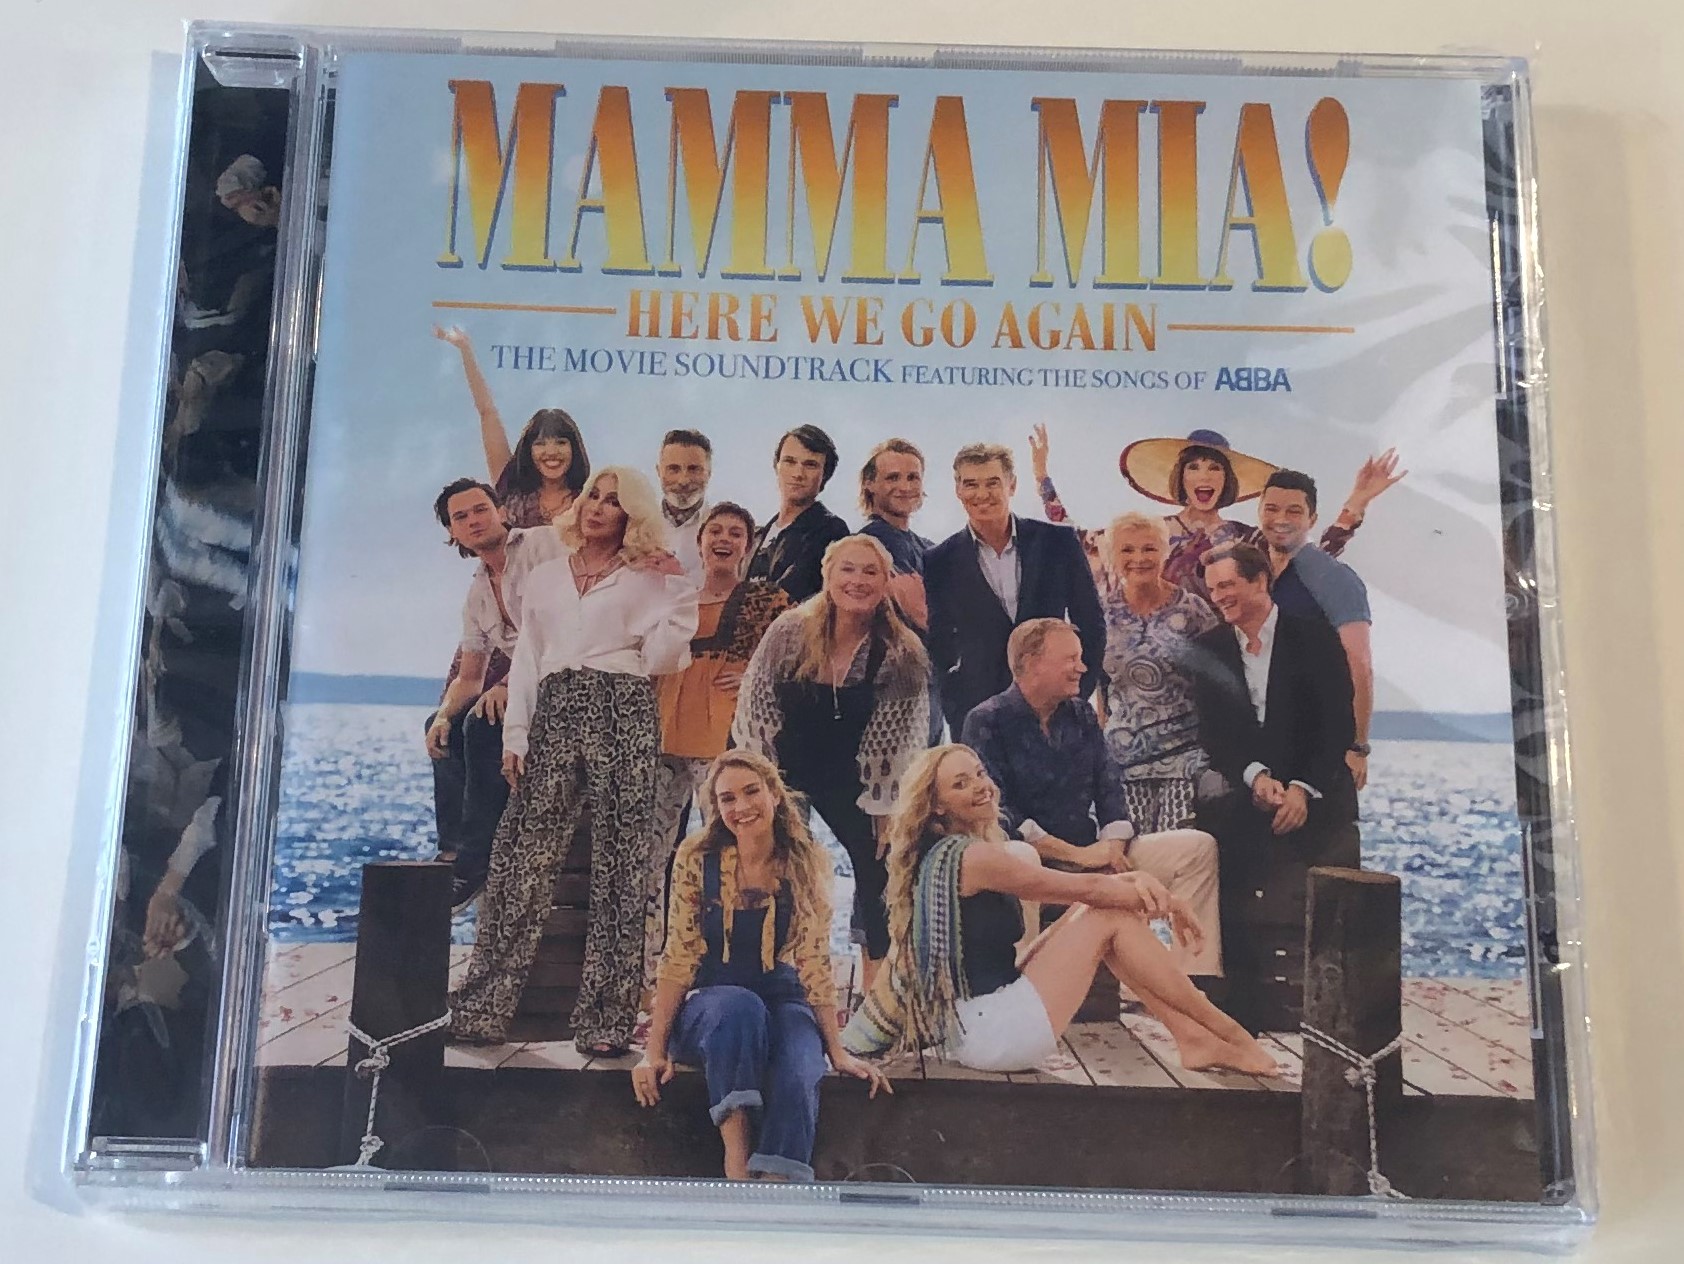 mamma-mia-here-we-go-again-the-movie-soundtrack-featuring-the-songs-of-abba-polydor-audio-cd-2018-6742623-1-.jpg